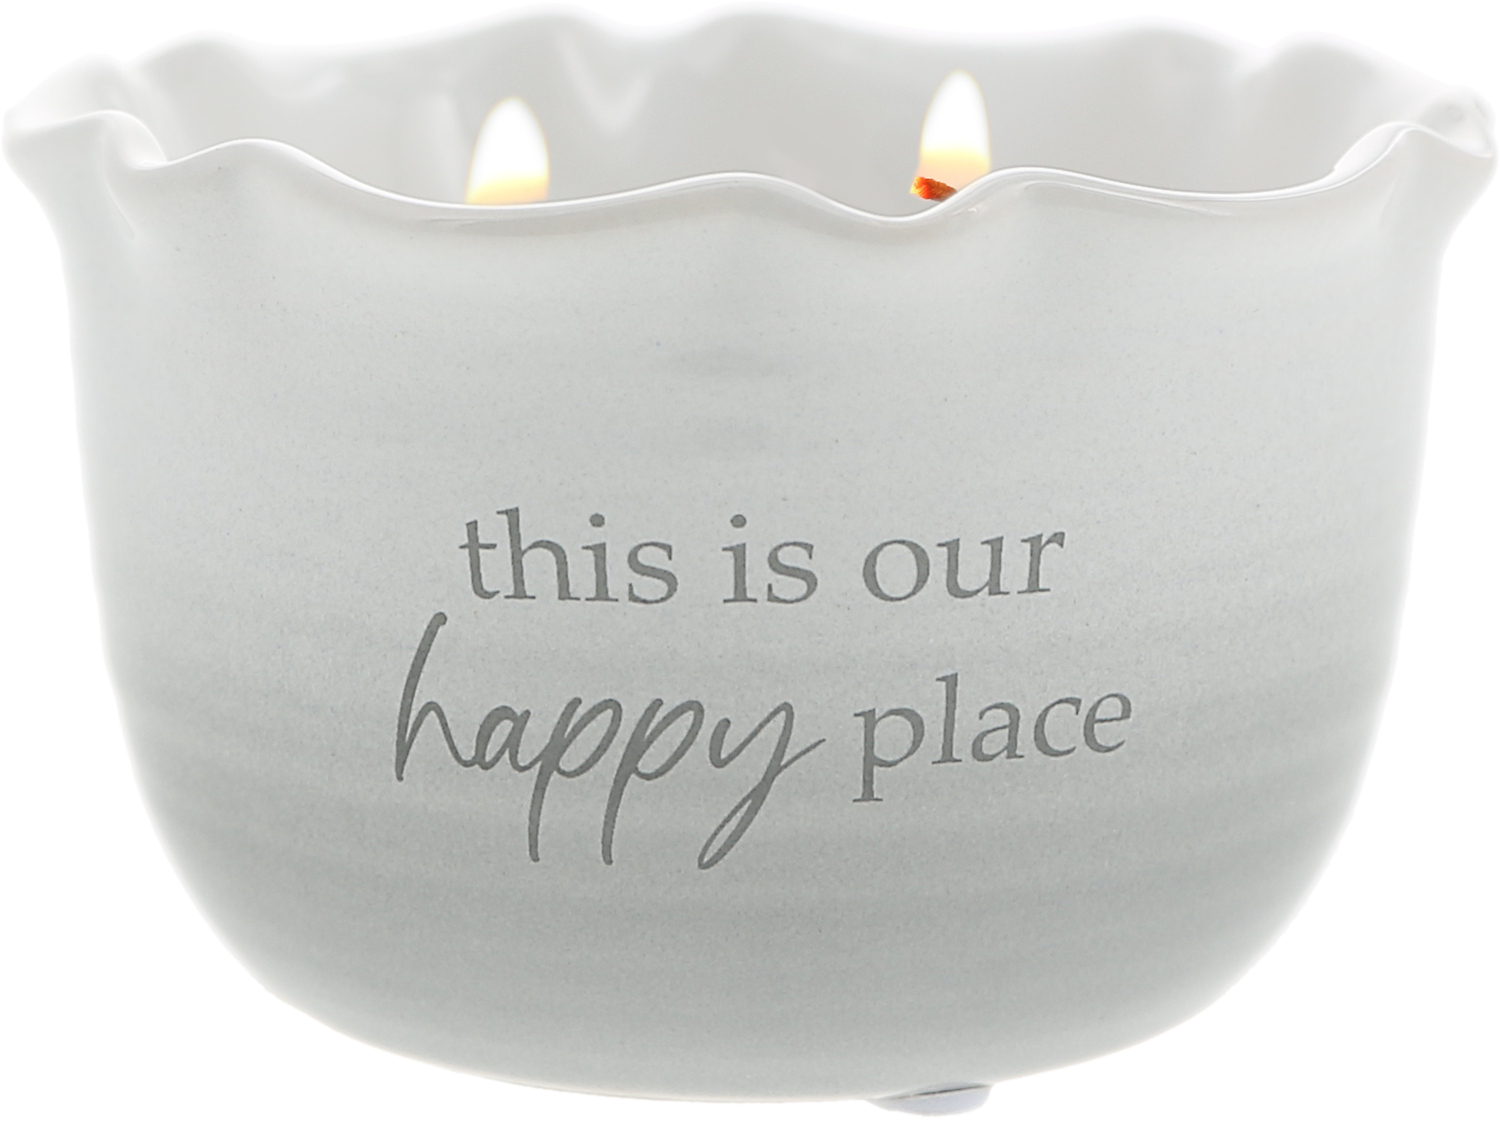 Happy Place by Thoughts of Home - Happy Place - 11 oz - 100% Soy Wax Reveal Candle
Scent: Tranquility